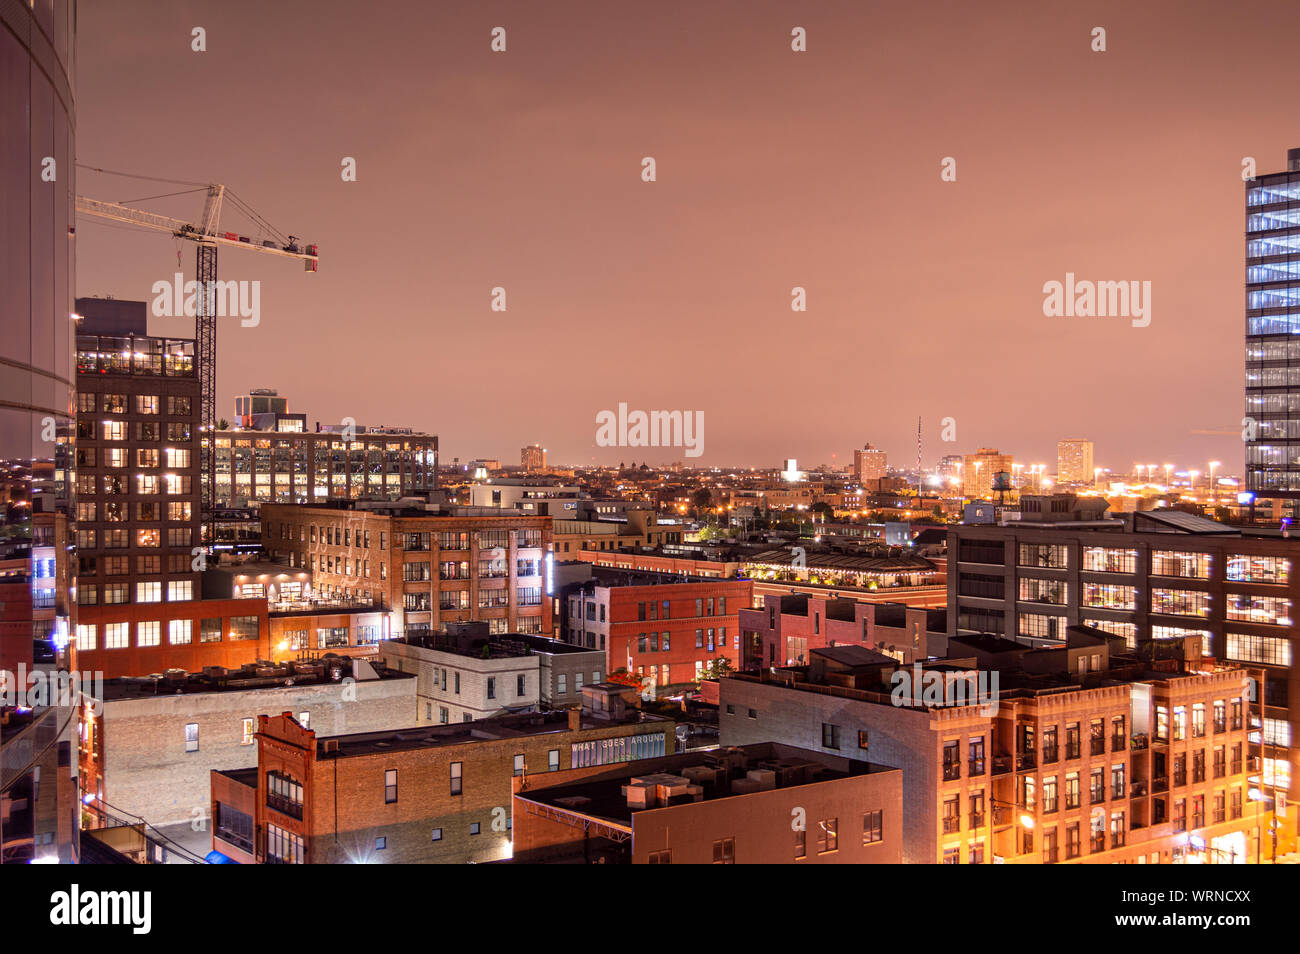 Fulton Market, Chicago-September 1, 2019: A roof top view of the city at night. Stock Photo